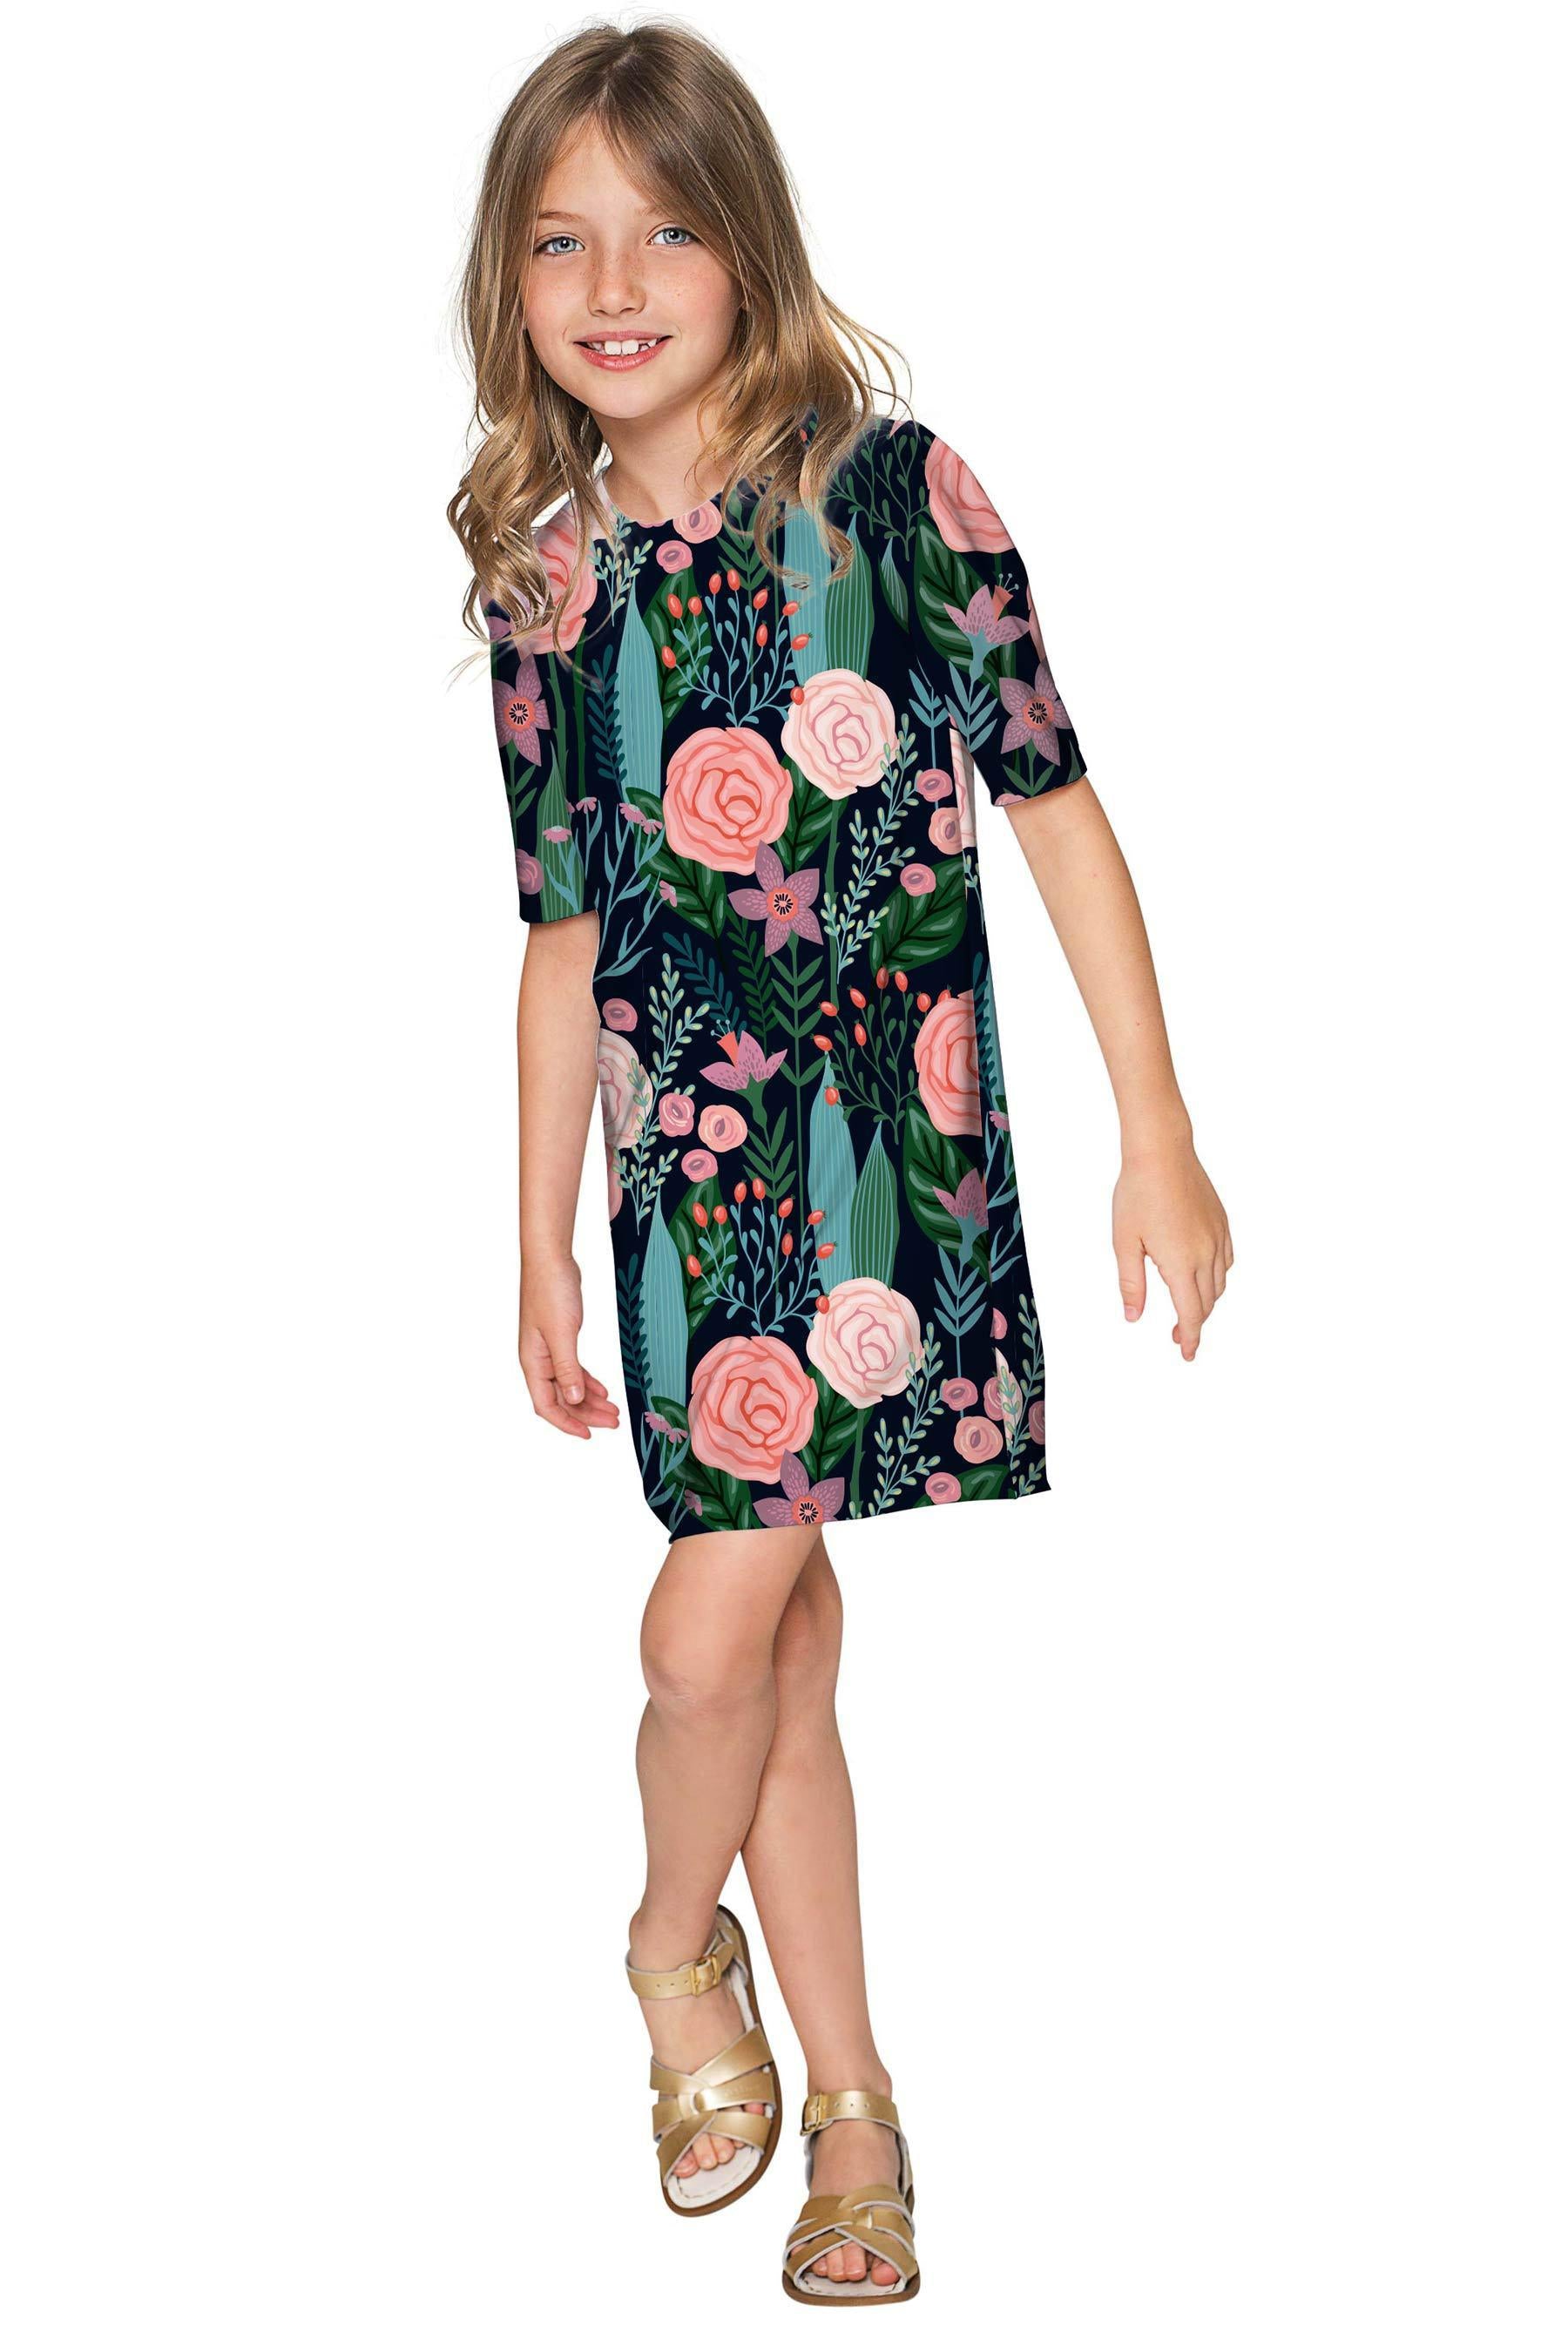 Cover Girl Grace Black Floral Party Shift Dress - Girls - Pineapple Clothing